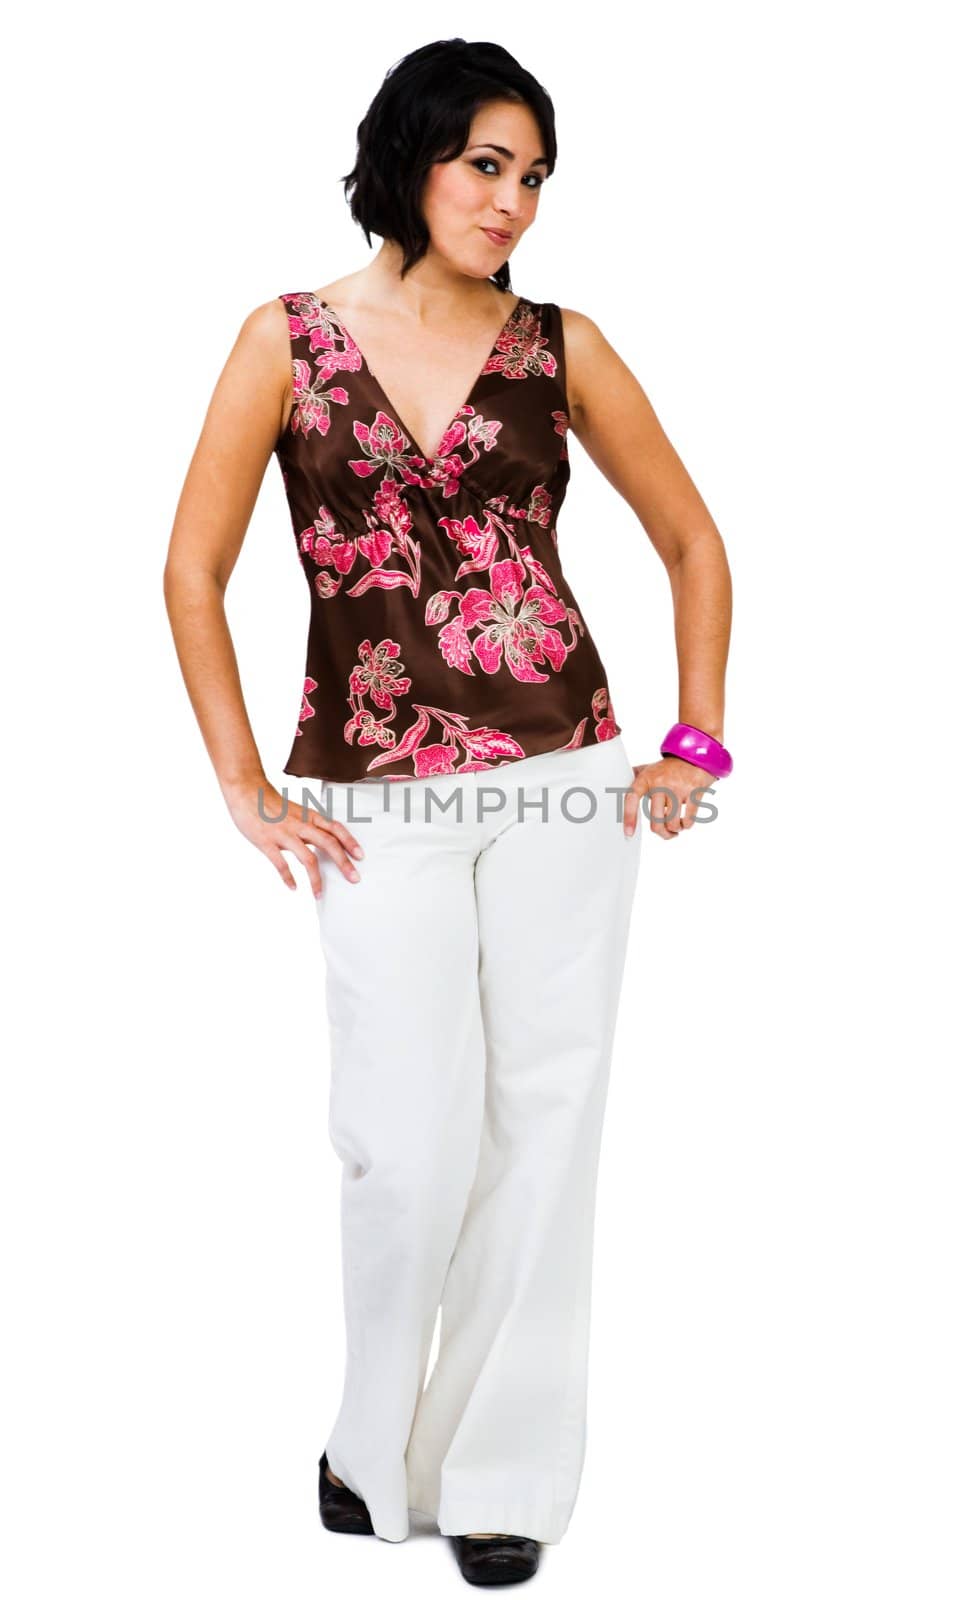 Mixedrace young woman posing and smiling isolated over white